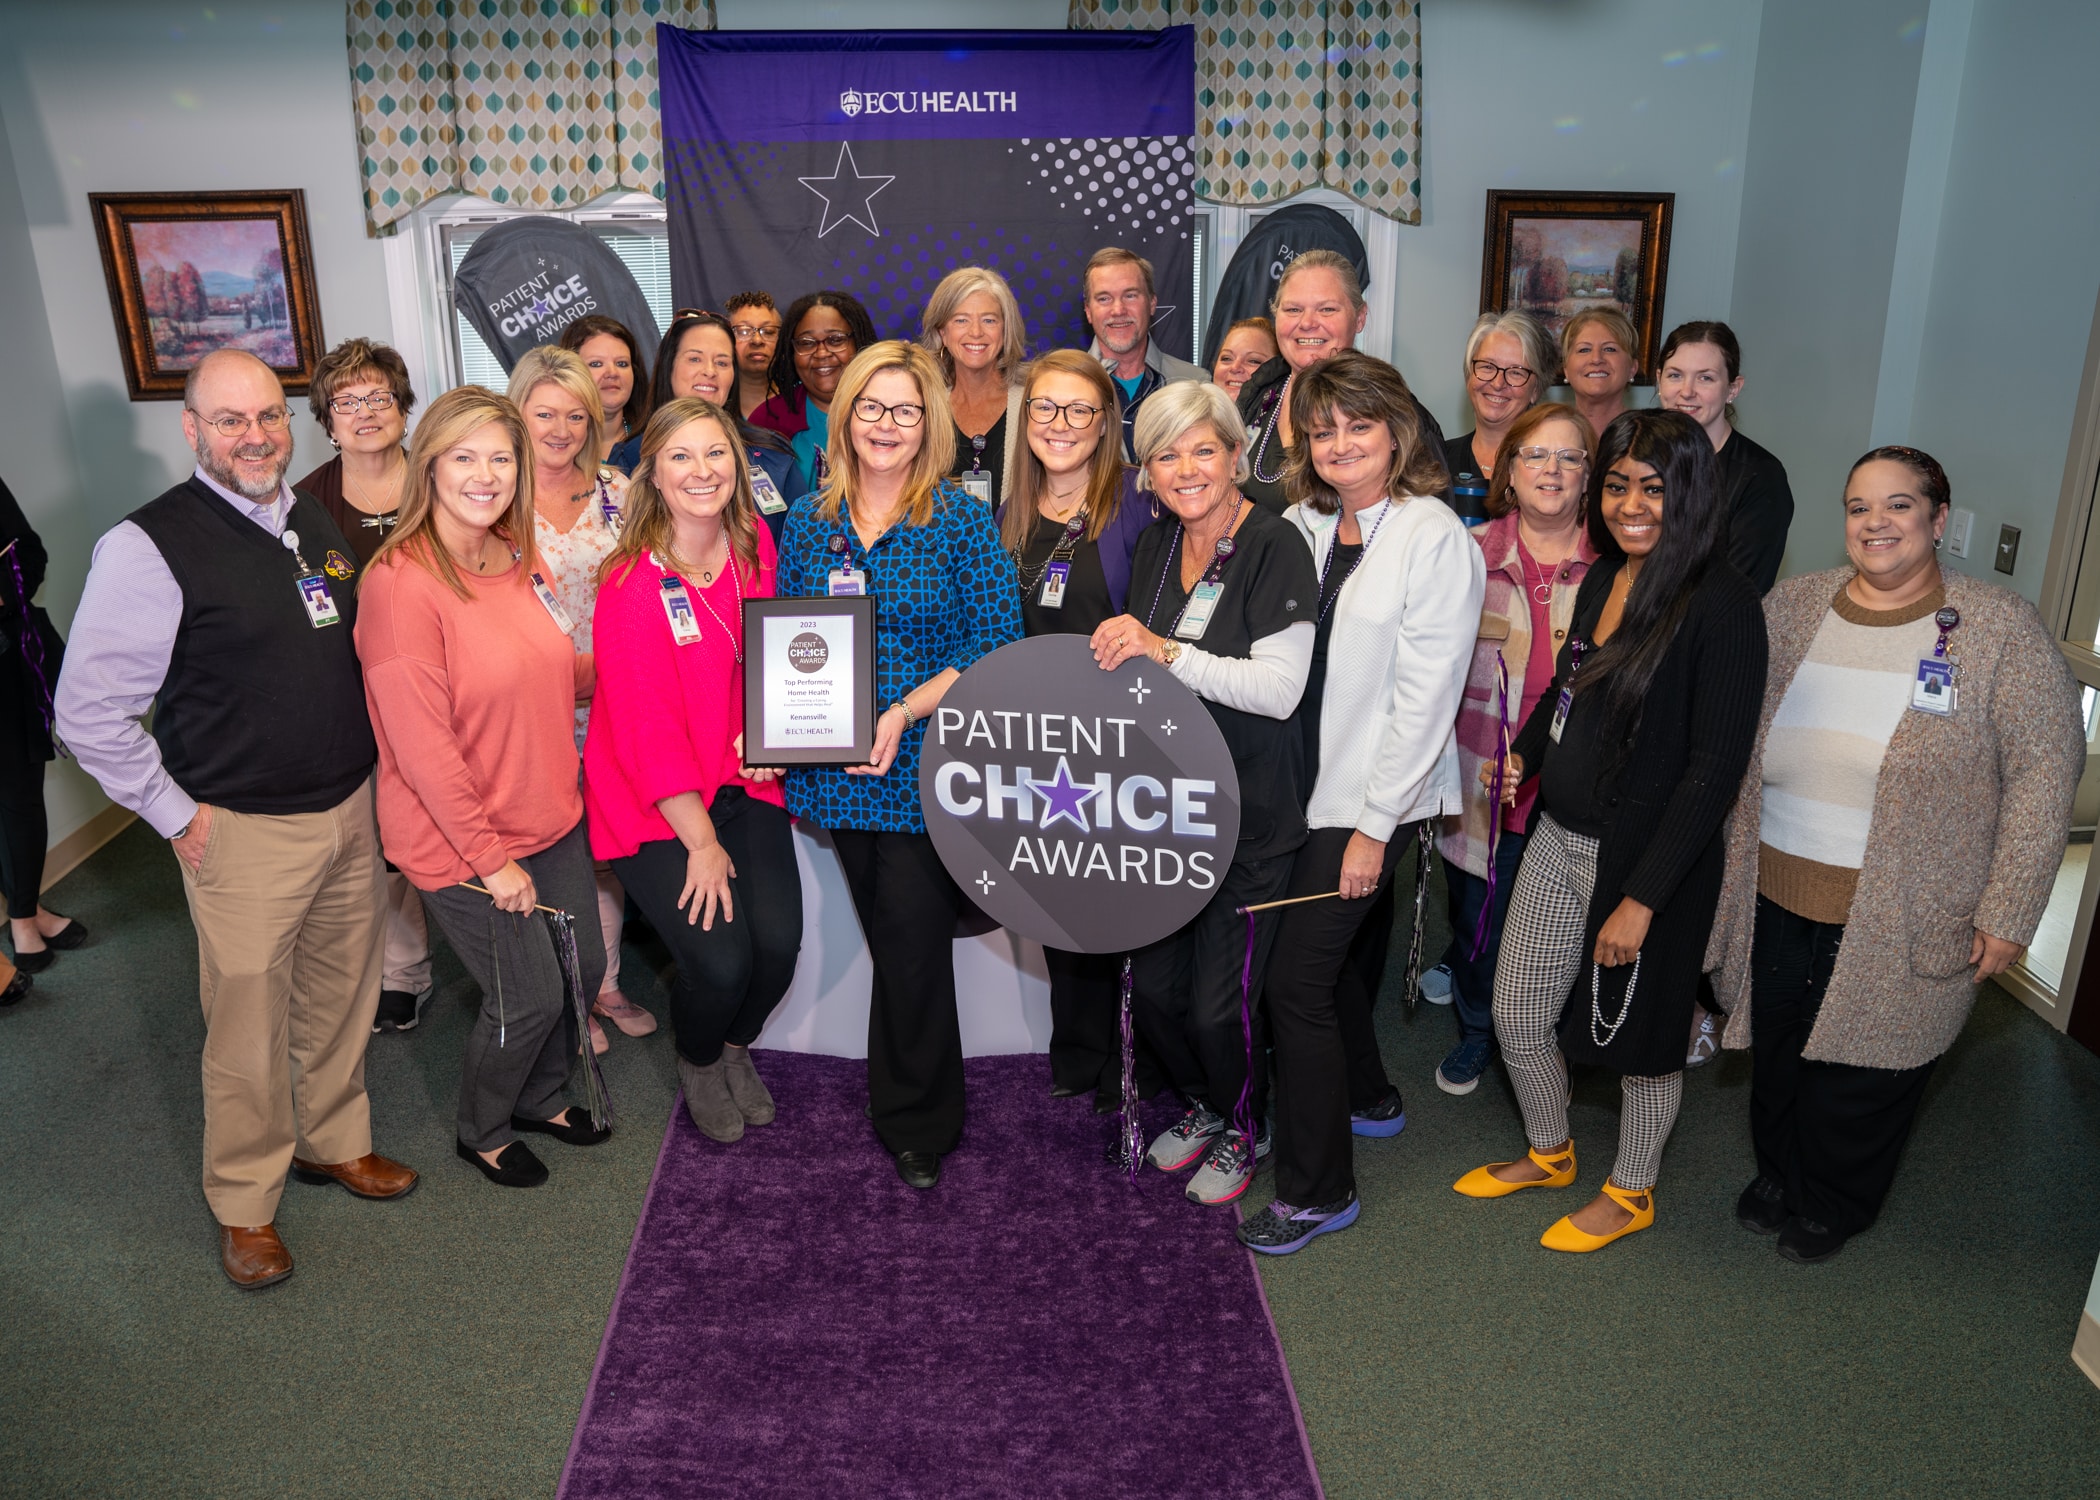 ECU Health Home Health Hospice Kenansville team members gather together for a group photo to celebrate their Patient Choice Award.